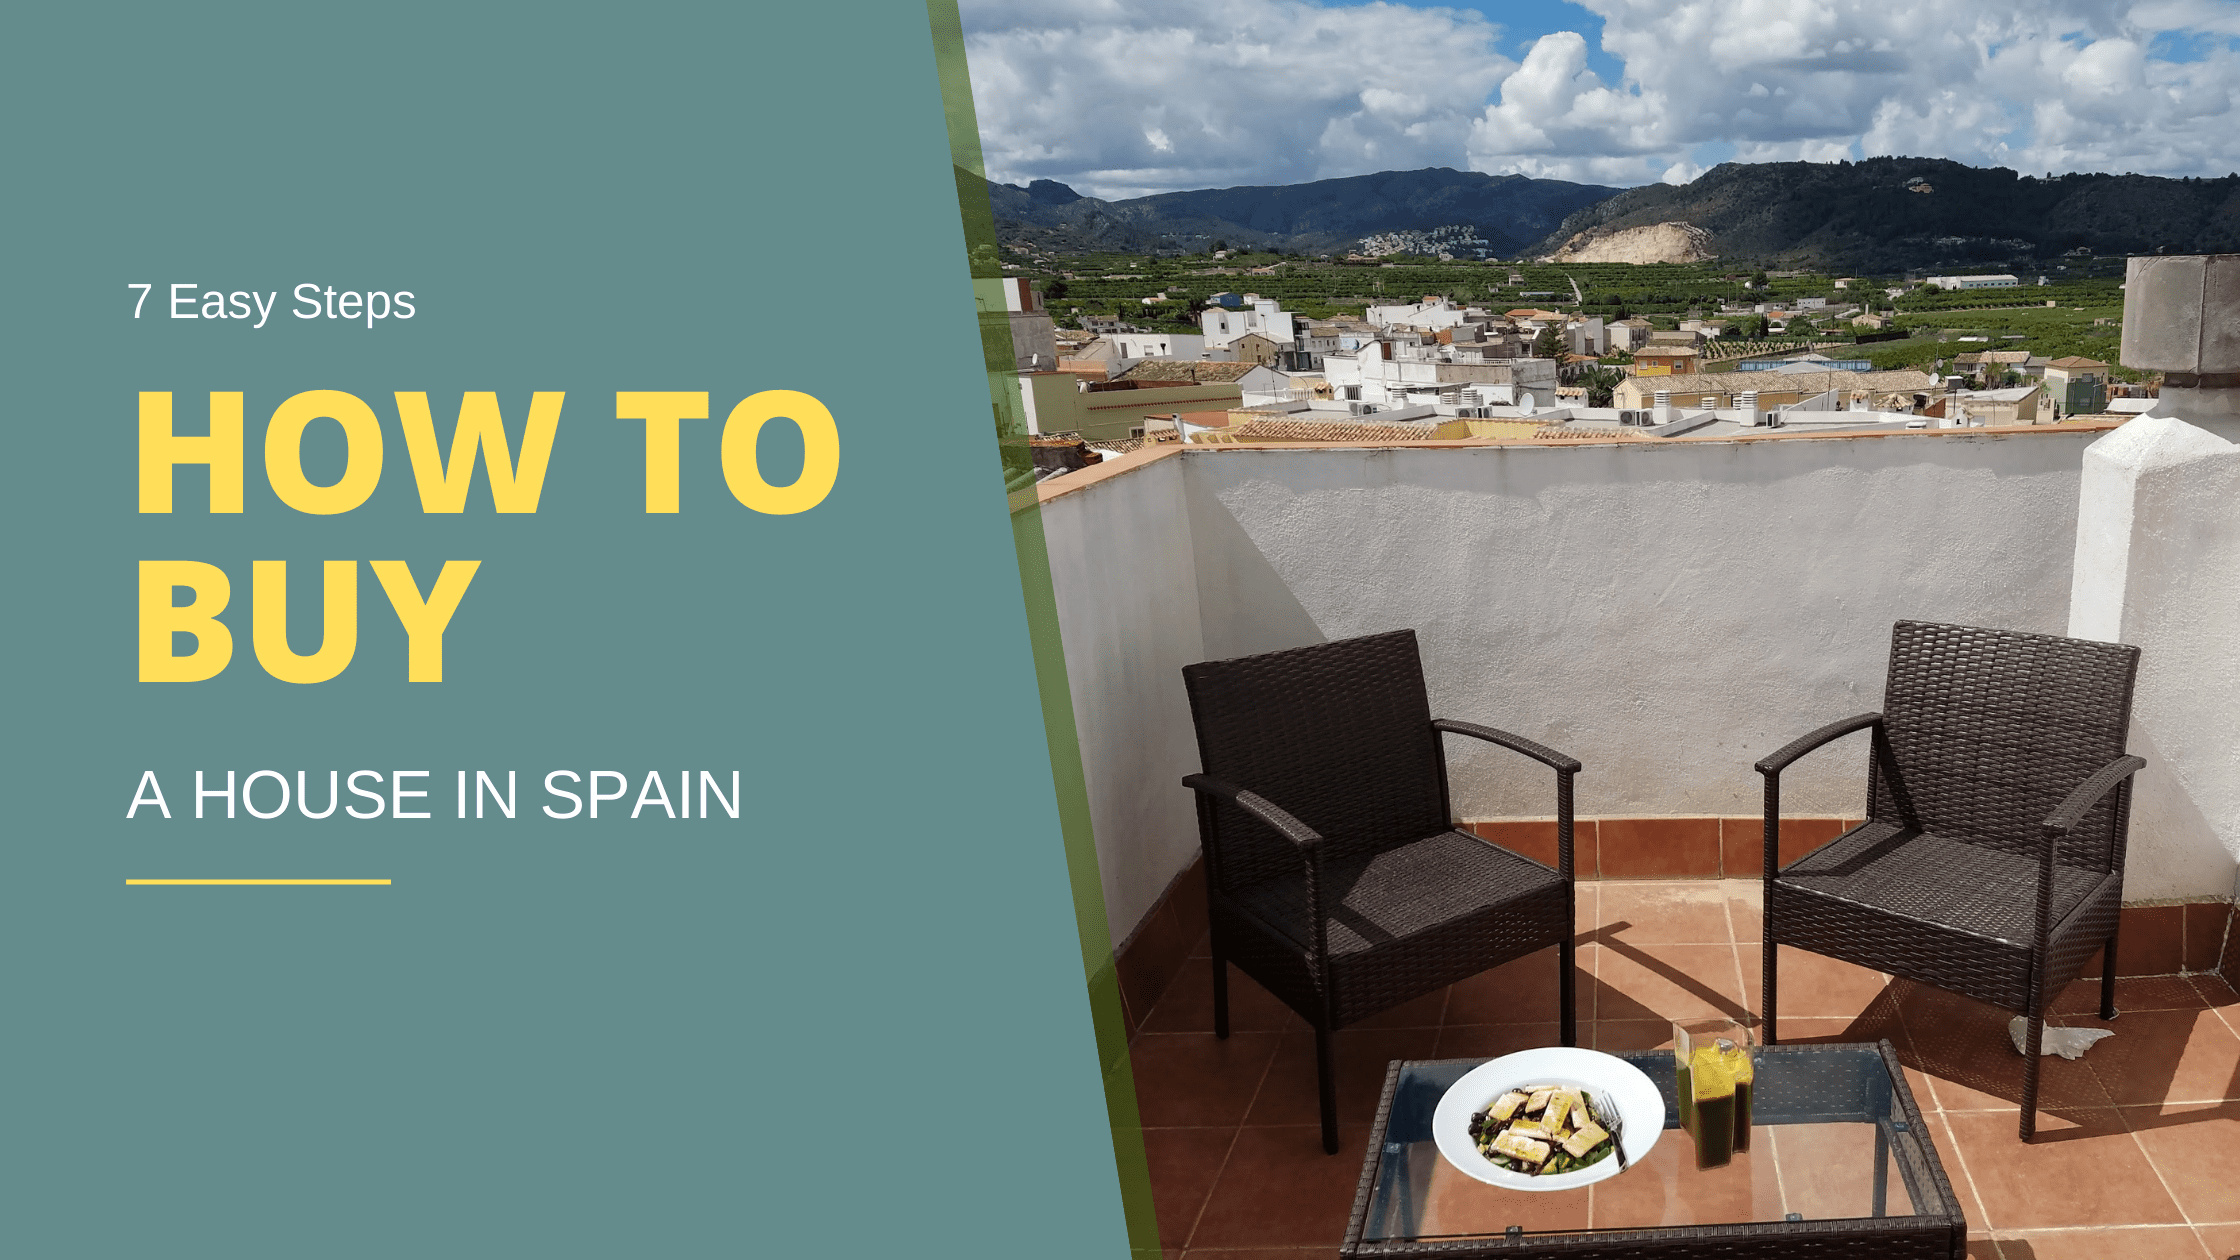 How to Buy a House in Spain Banner